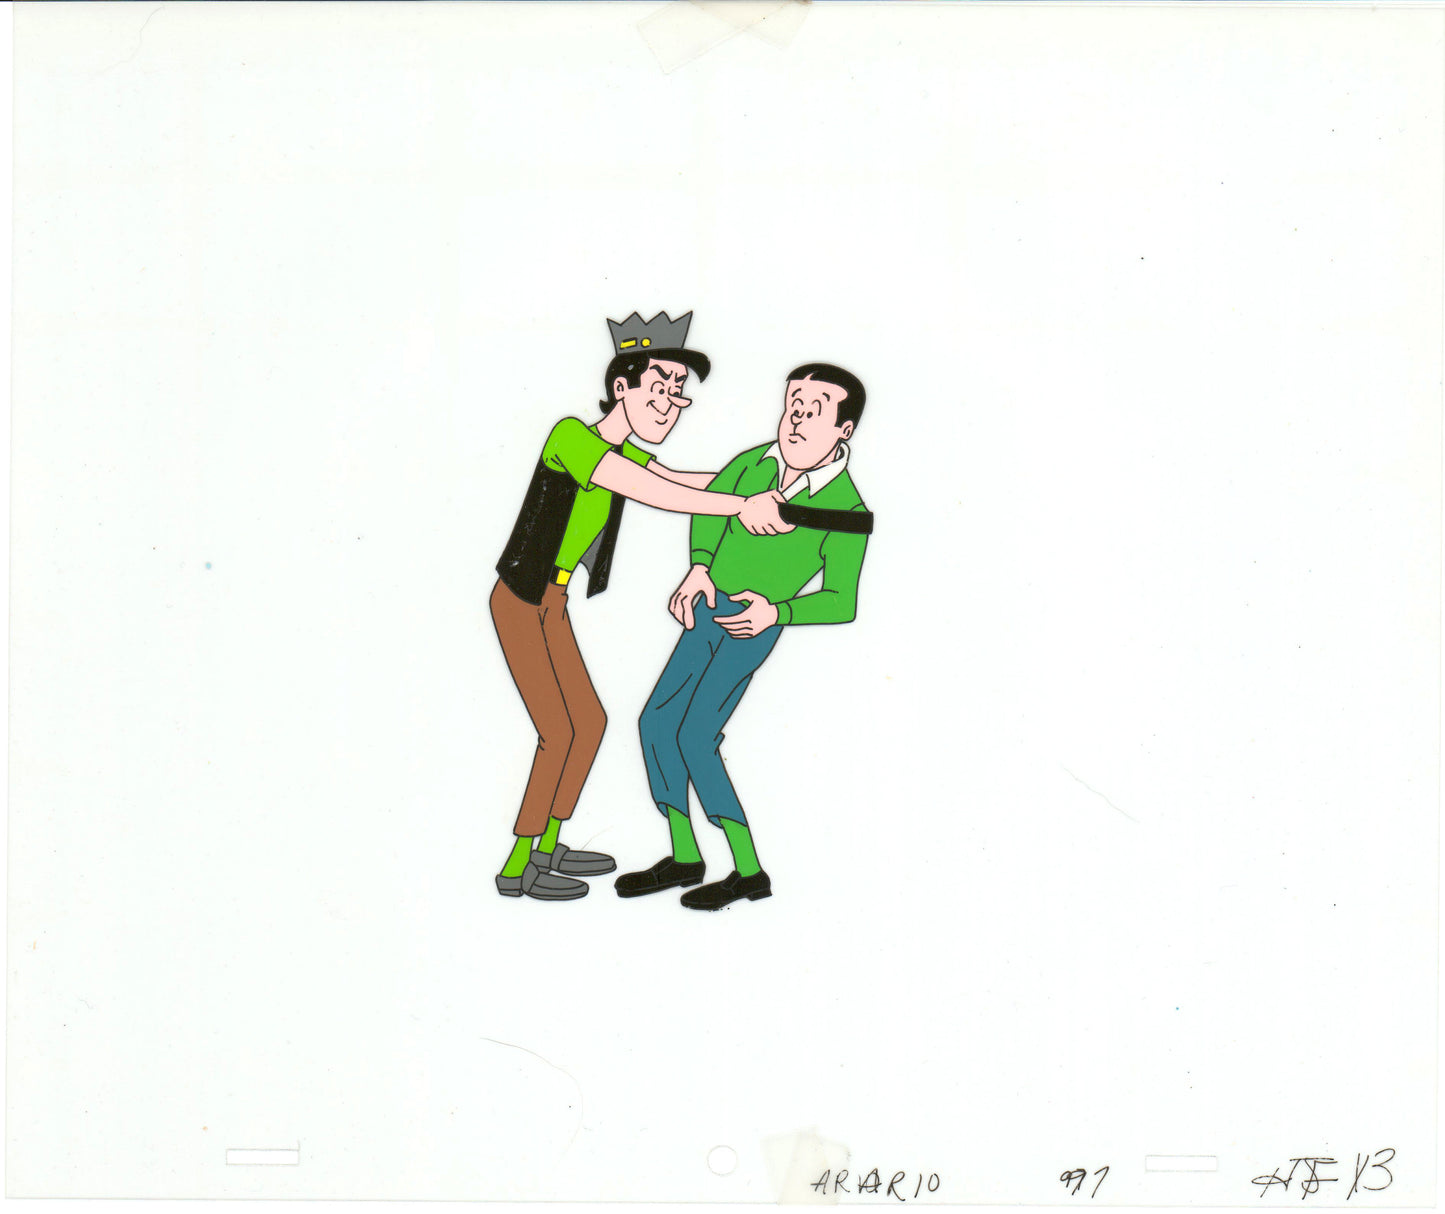 Archie Production Animation Art Cel Setup from Filmation 1968-1969 b2100